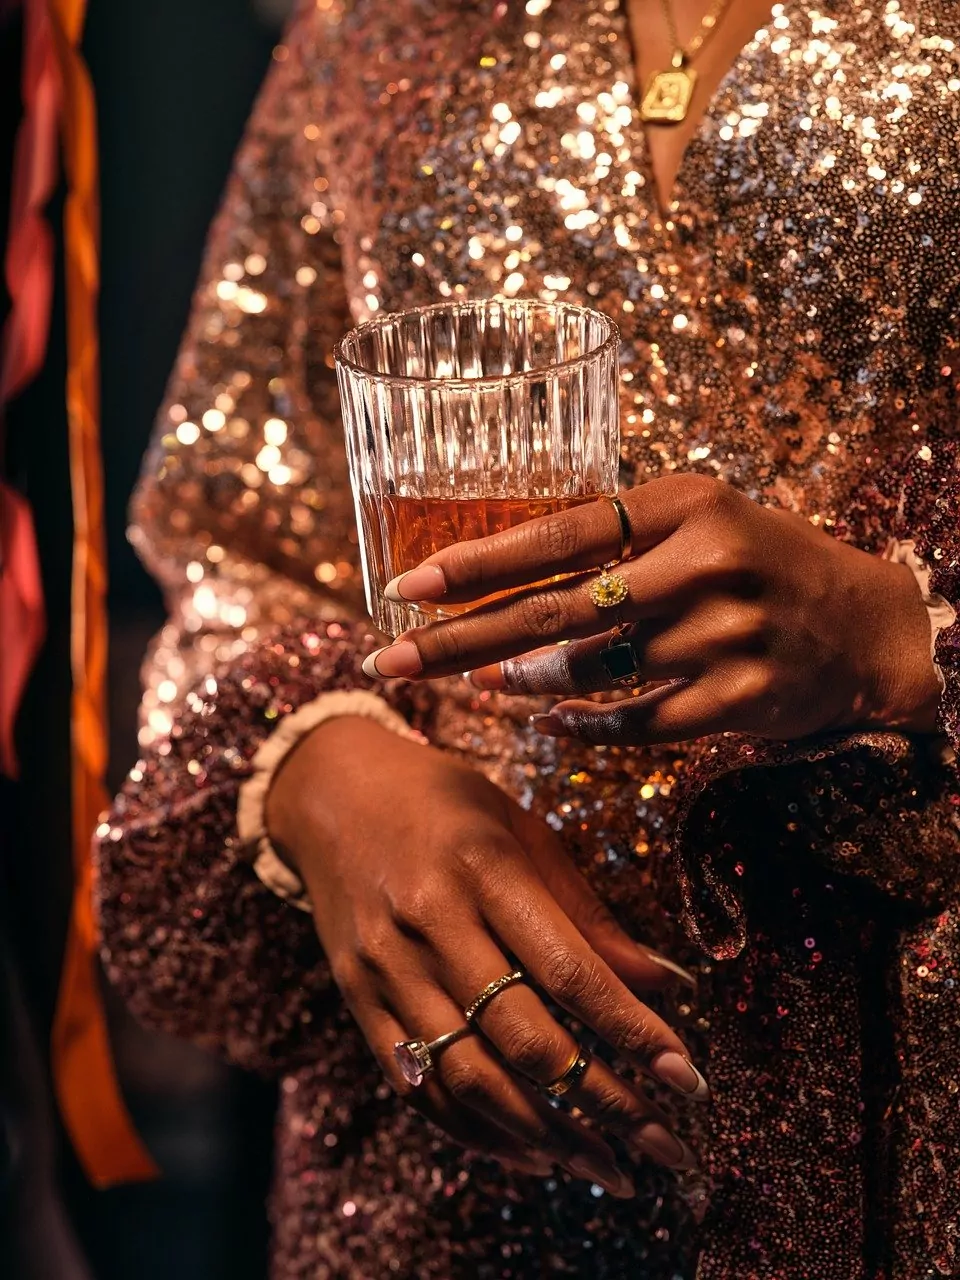 A woman in glamorous sequinned attire ta New Year's Eve celebration. The woman holds a glass of whiskey and her dazzling jewellery is in shot.